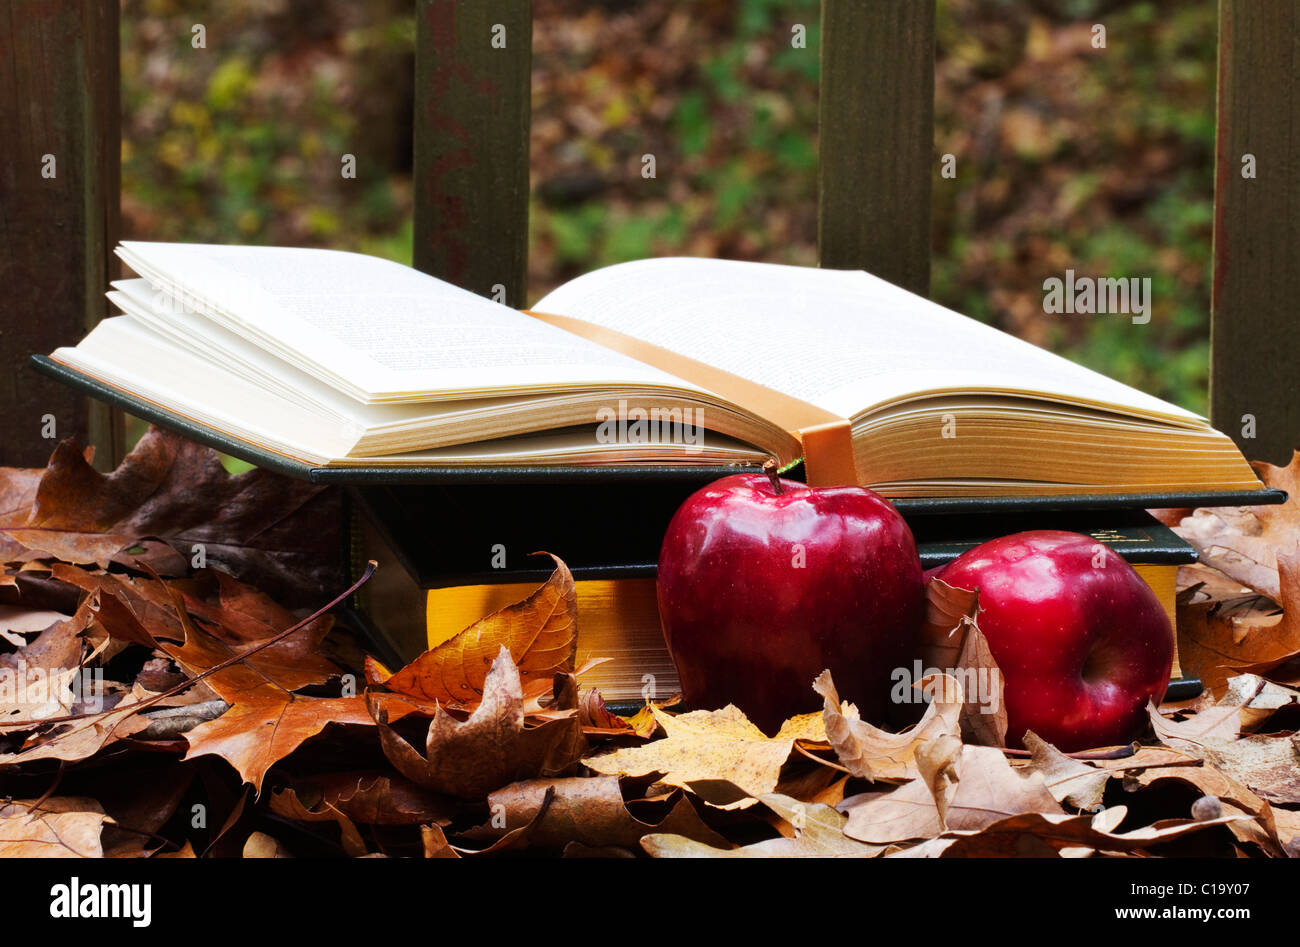 Textbooks nestled in colorful autumn leaves with apples in foreground depict academic emphasis of new school year. Stock Photo